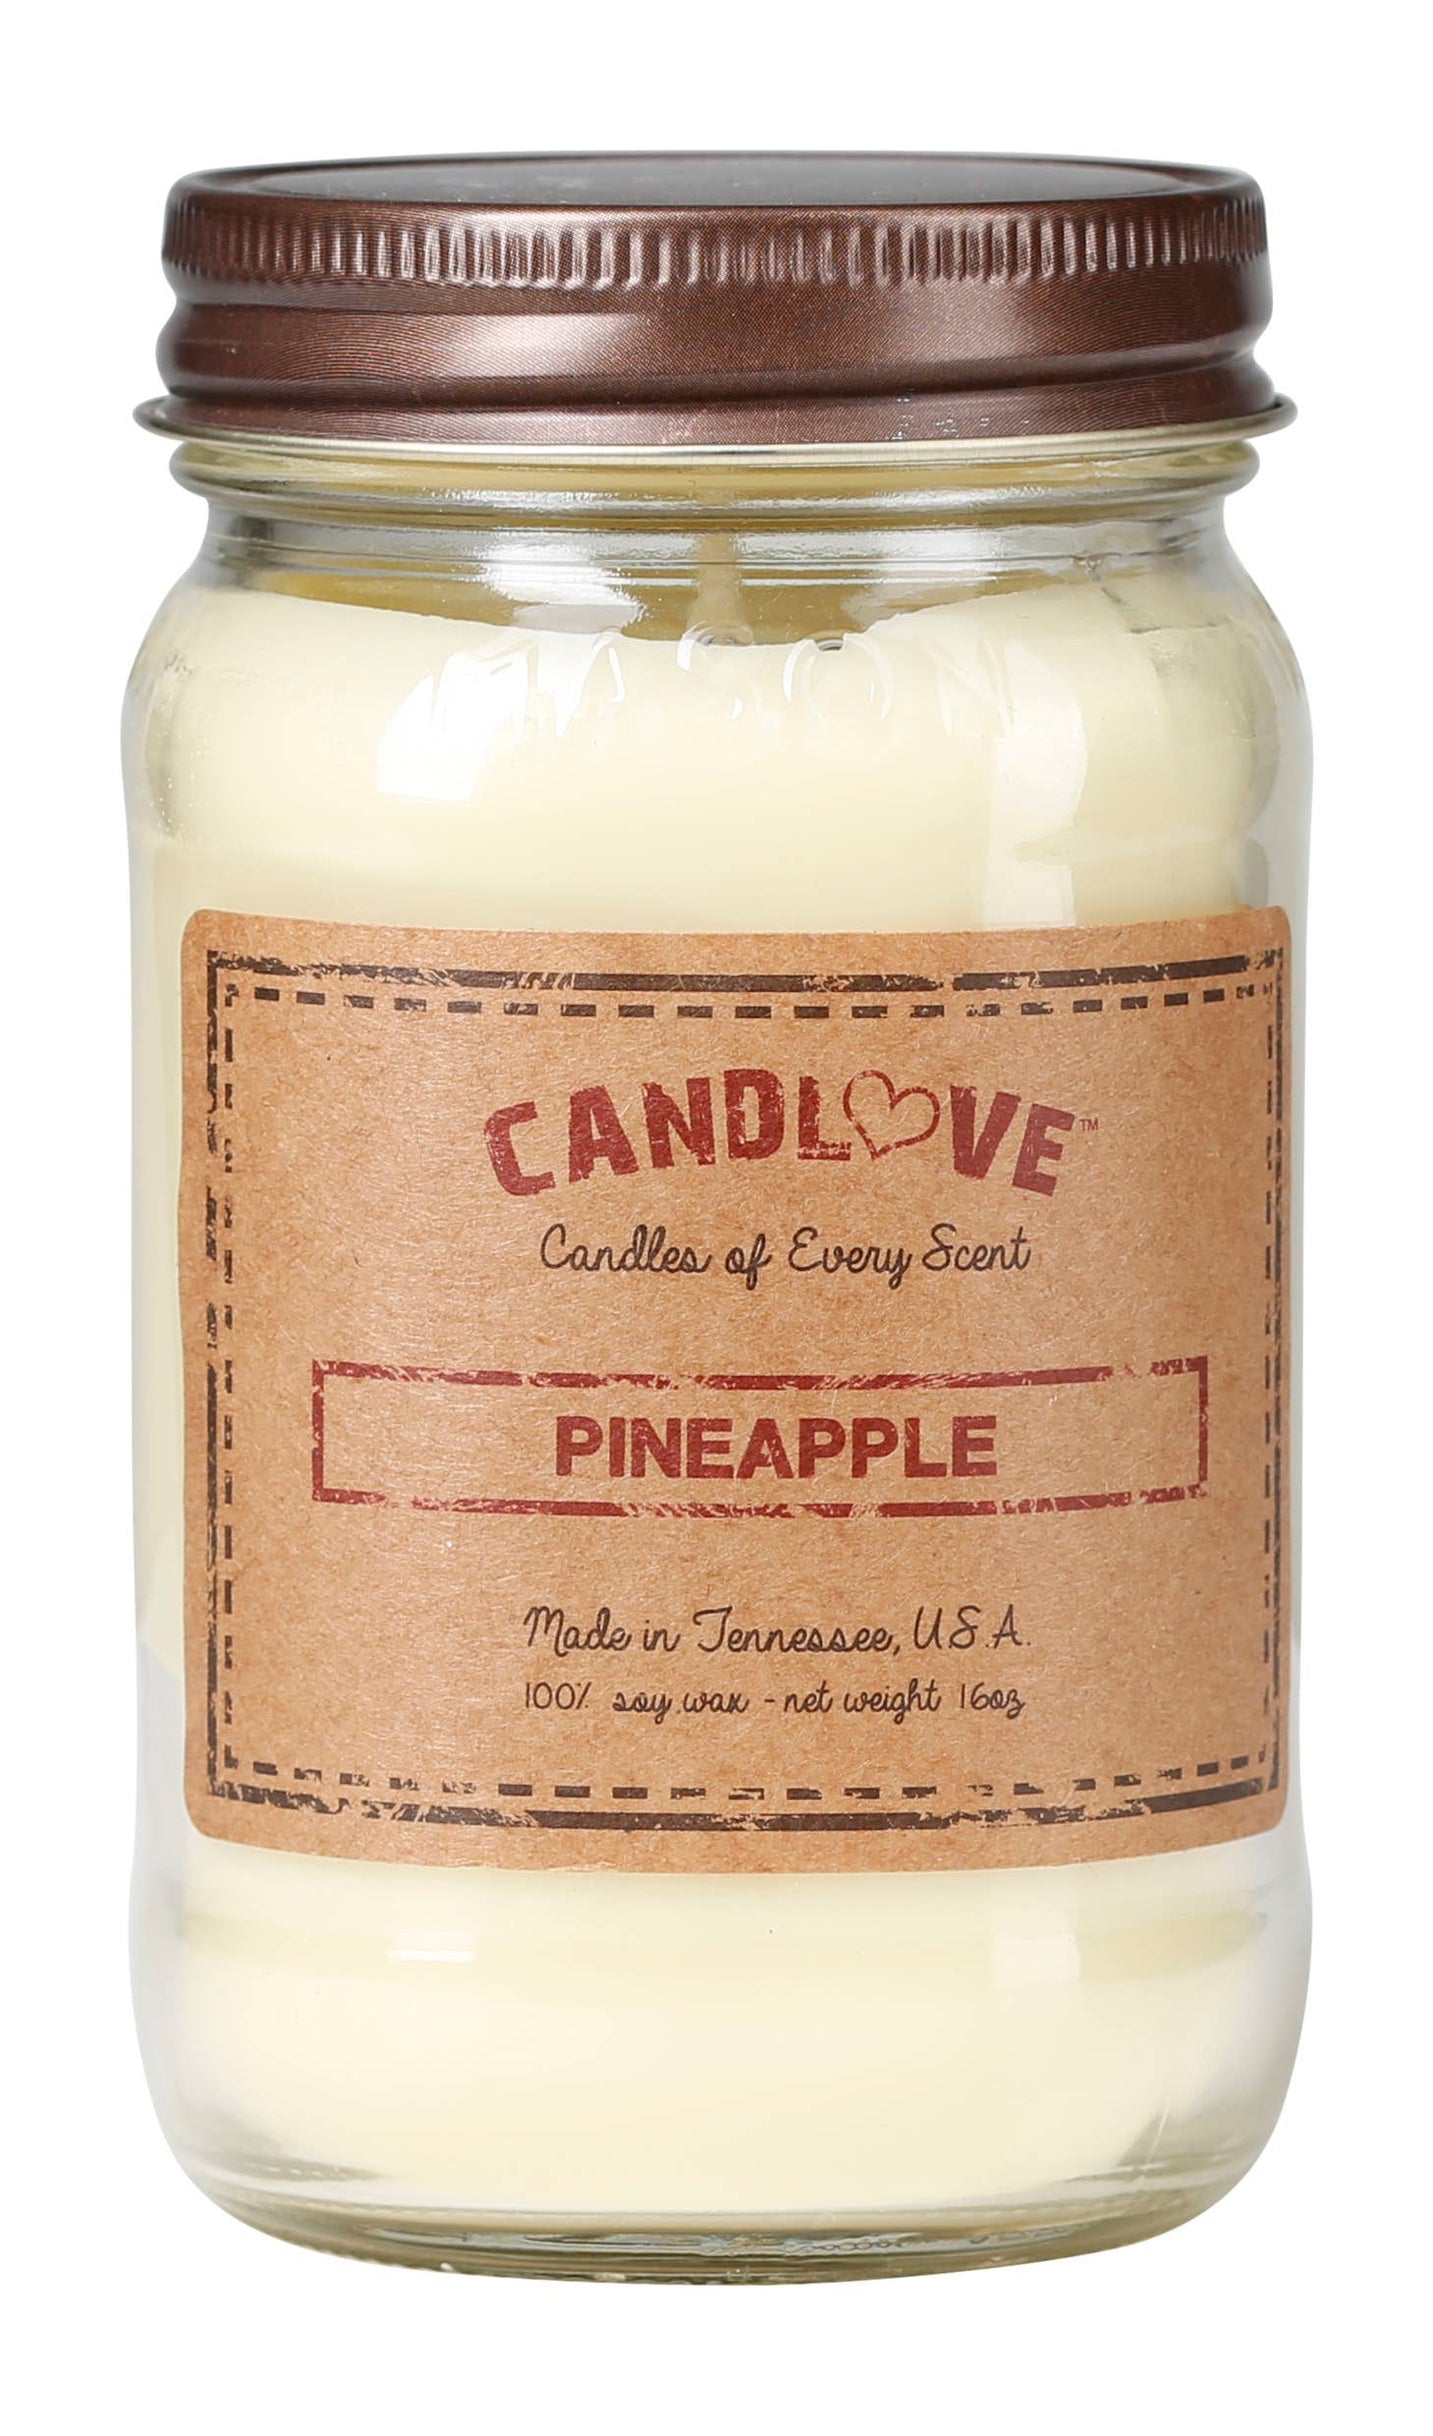 Candlove Candle Co. Soy Candles